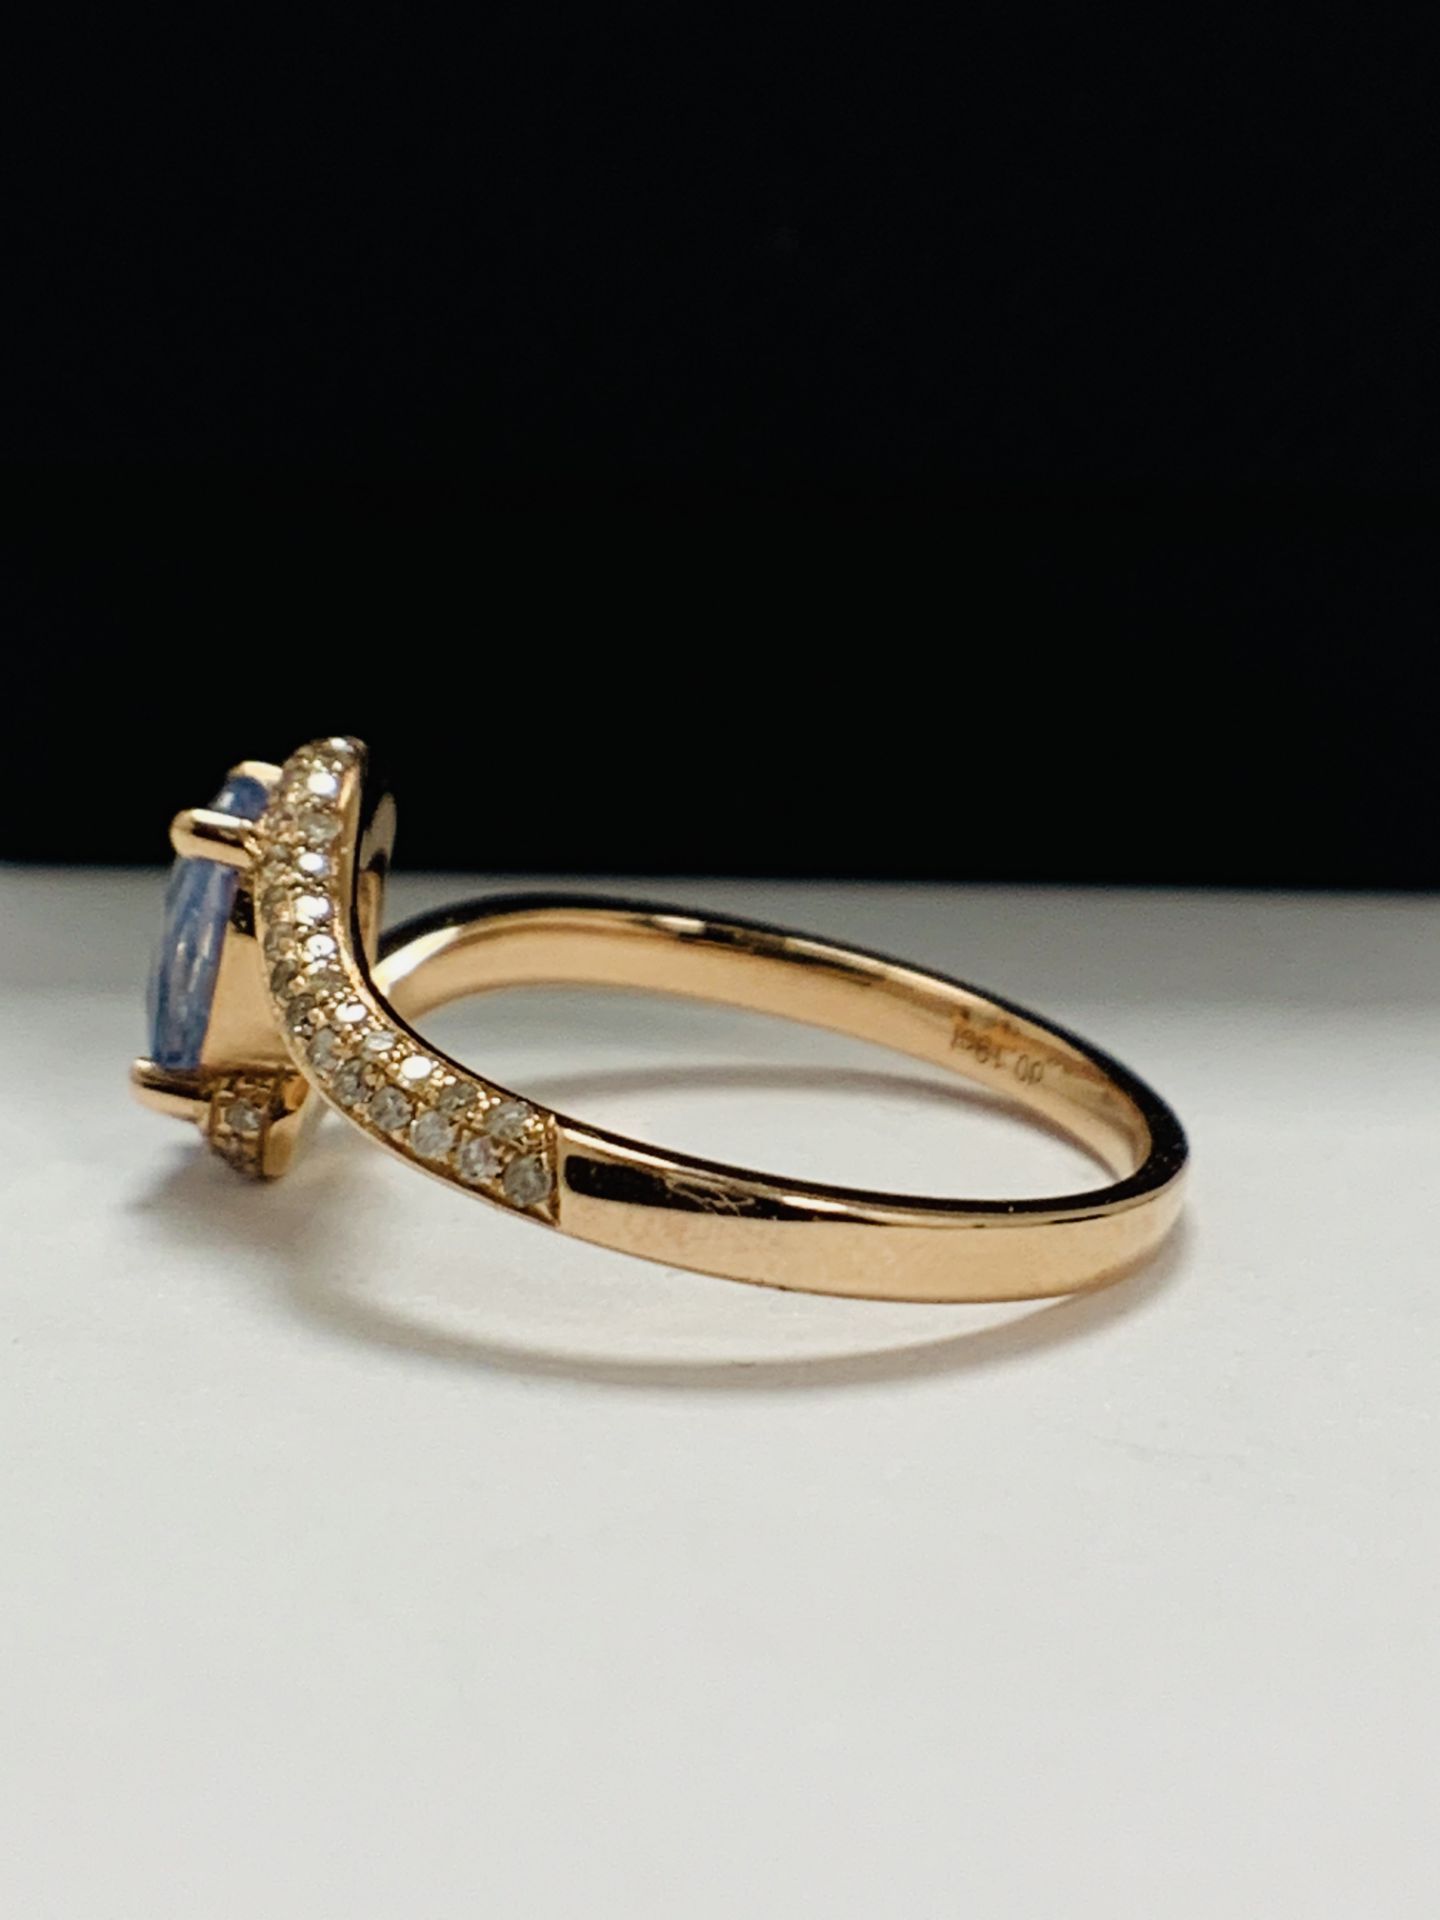 14ct Rose Gold Sapphire and Diamond Ring - Image 4 of 13